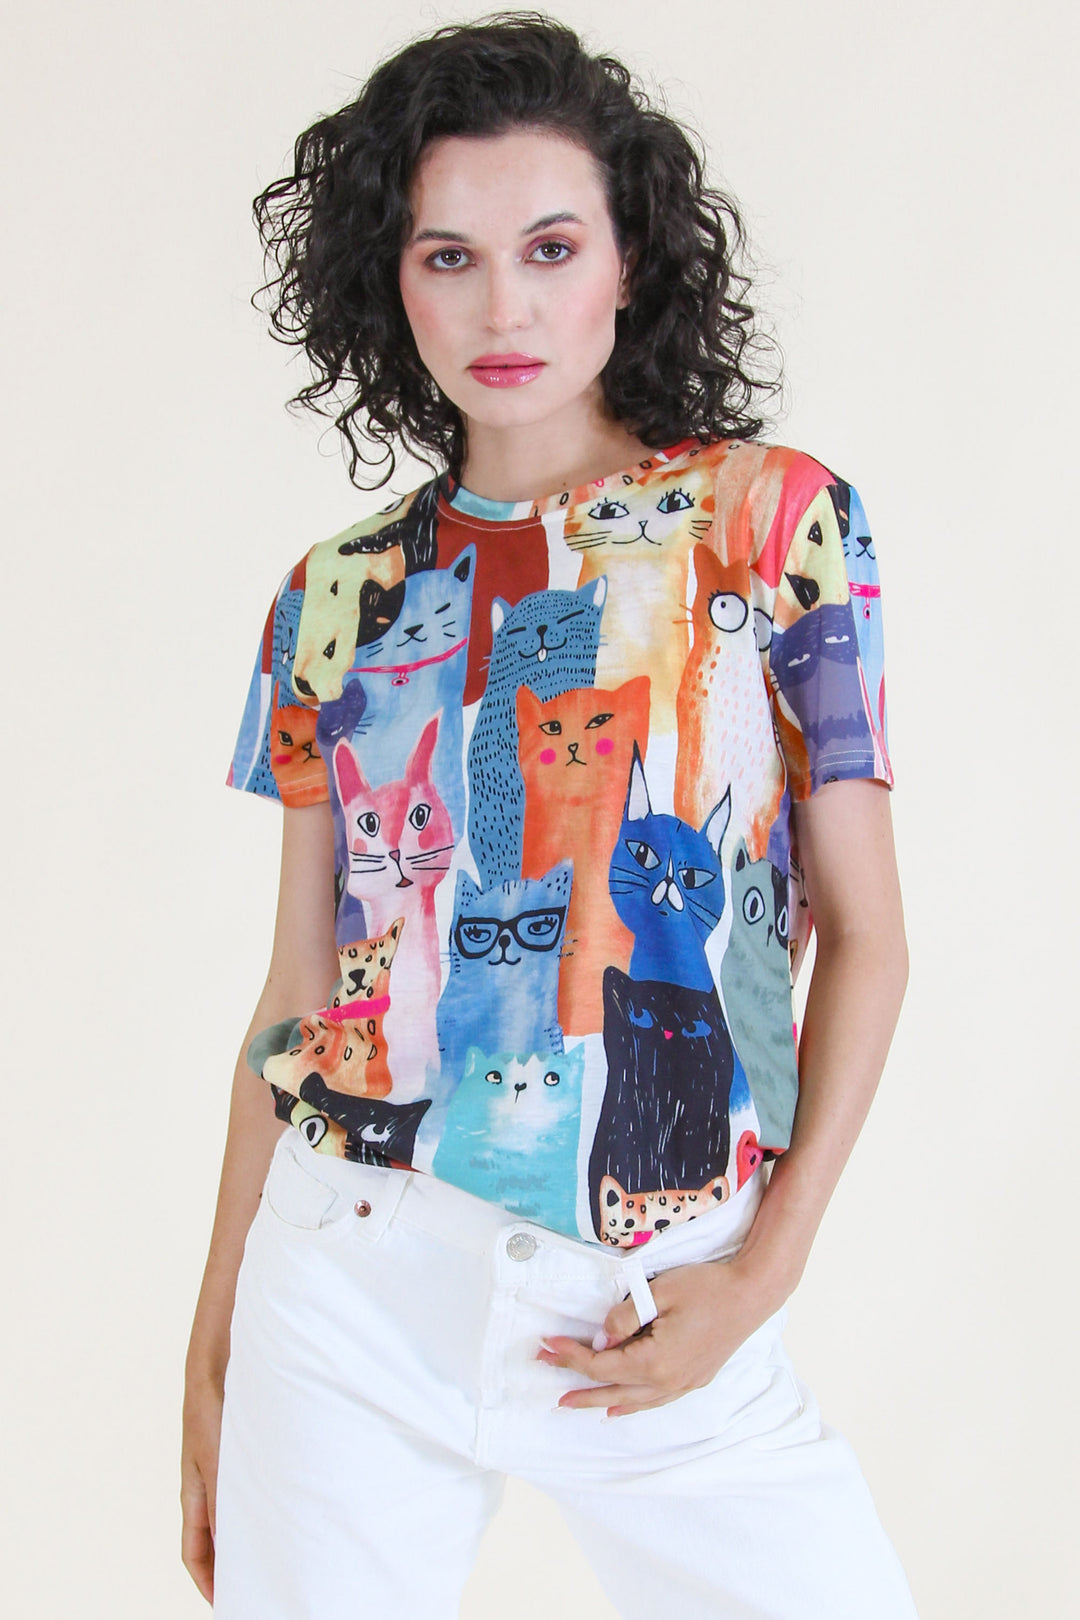 Funsport Summer 2024 Grab this meow-nificent Cat Print Tee, perfect for any feline fan (or not)! Light and classic, with vibrant short sleeves, this tee is one-of-a-kind. Hurry and get it before this purr-fect piece is gone!